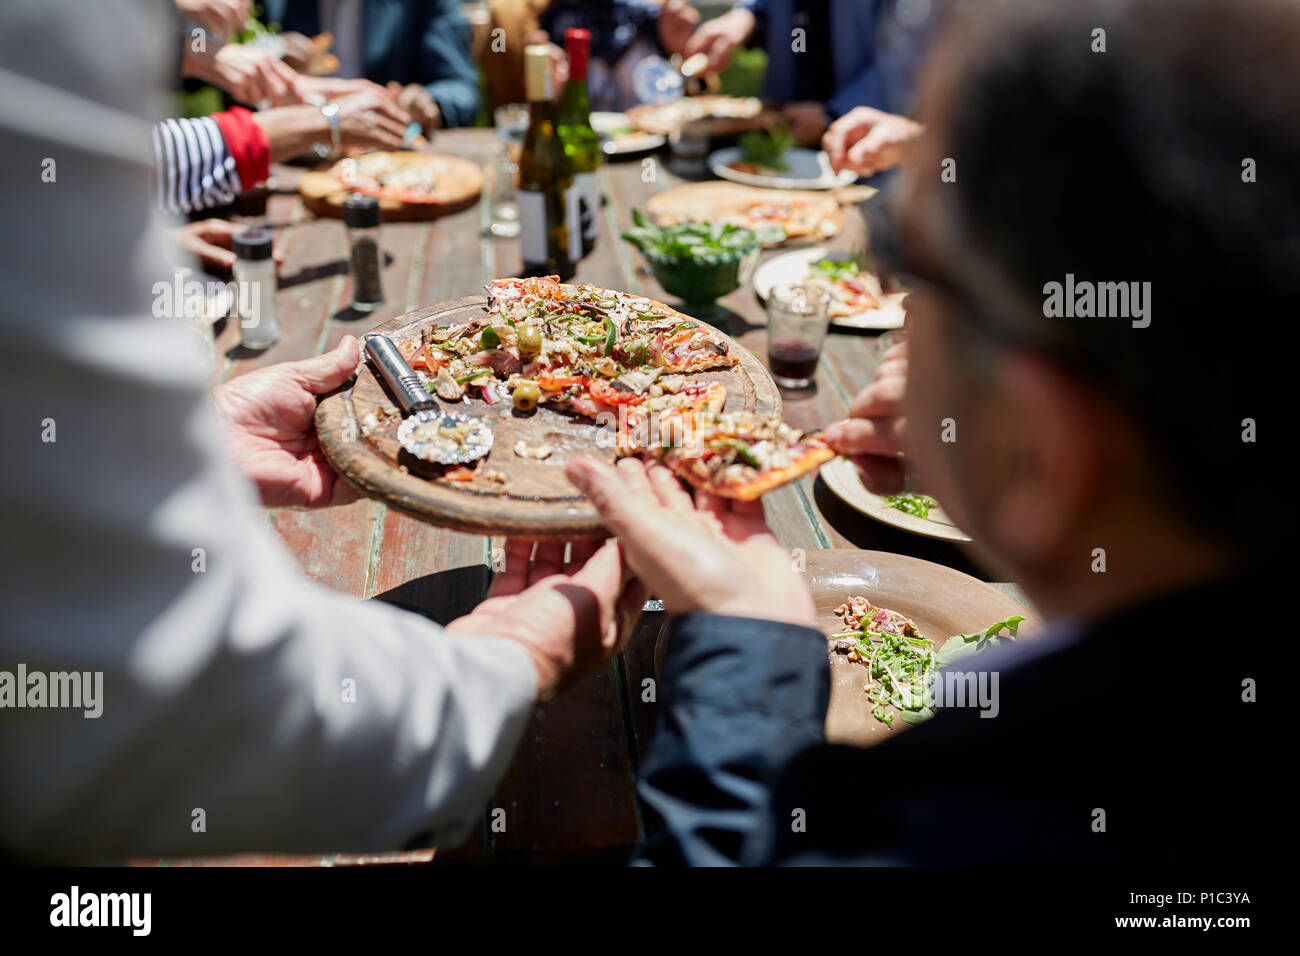 Friends sharing homemade pizza at sunny patio table Stock Photo